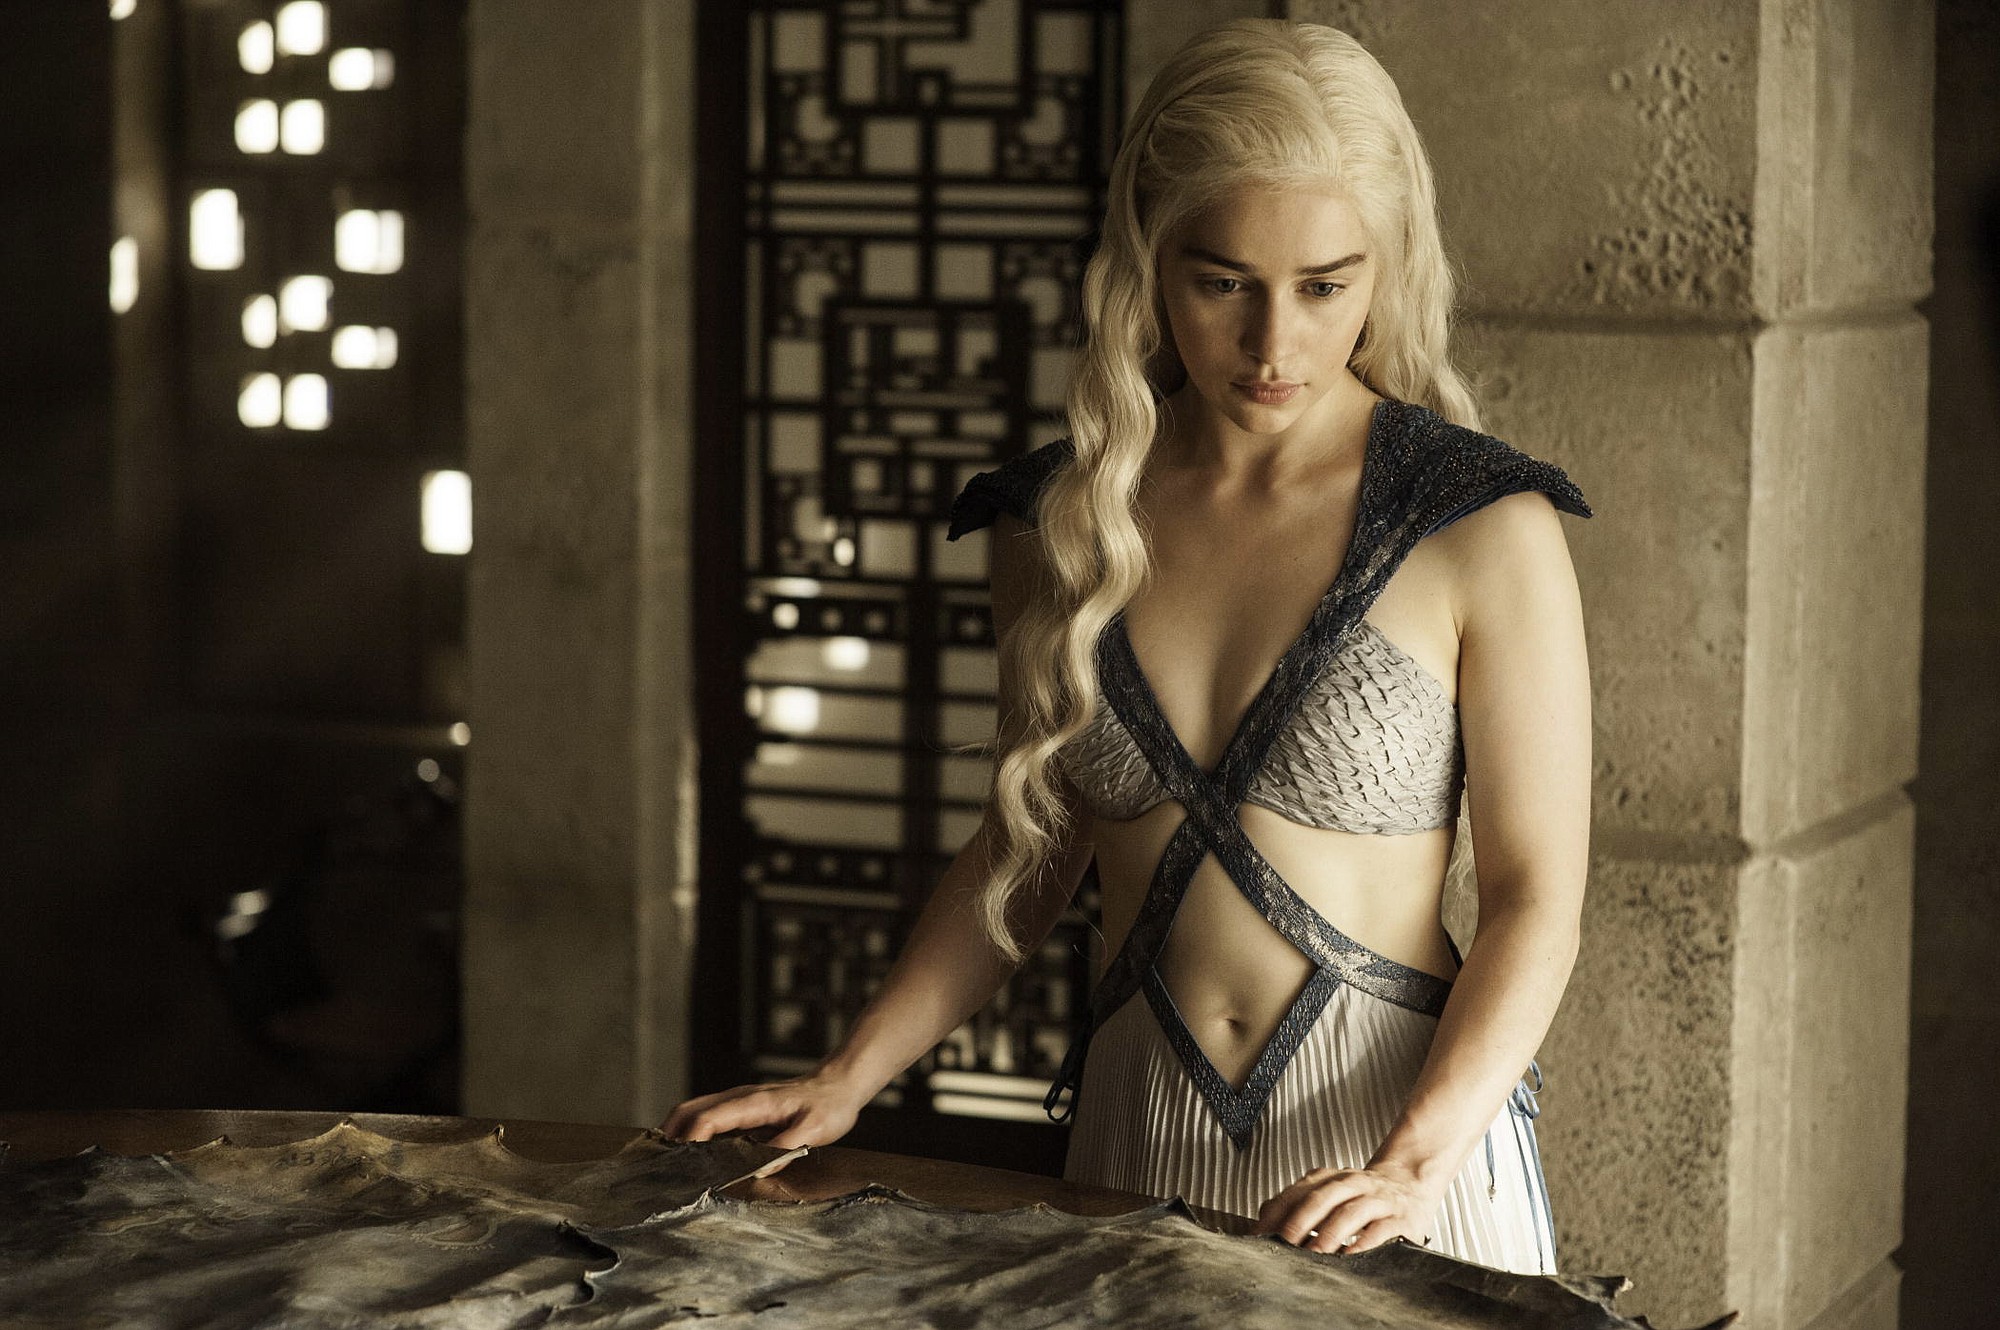 Daenerys Targaryen, portrayed by Emilia Clarke, appears in a scene from season four of &quot;Game of Thrones.&quot; Northern Illinois University is offering a course this semester on the HBO series &quot;Game of Thrones,&quot; now in its fifth season.